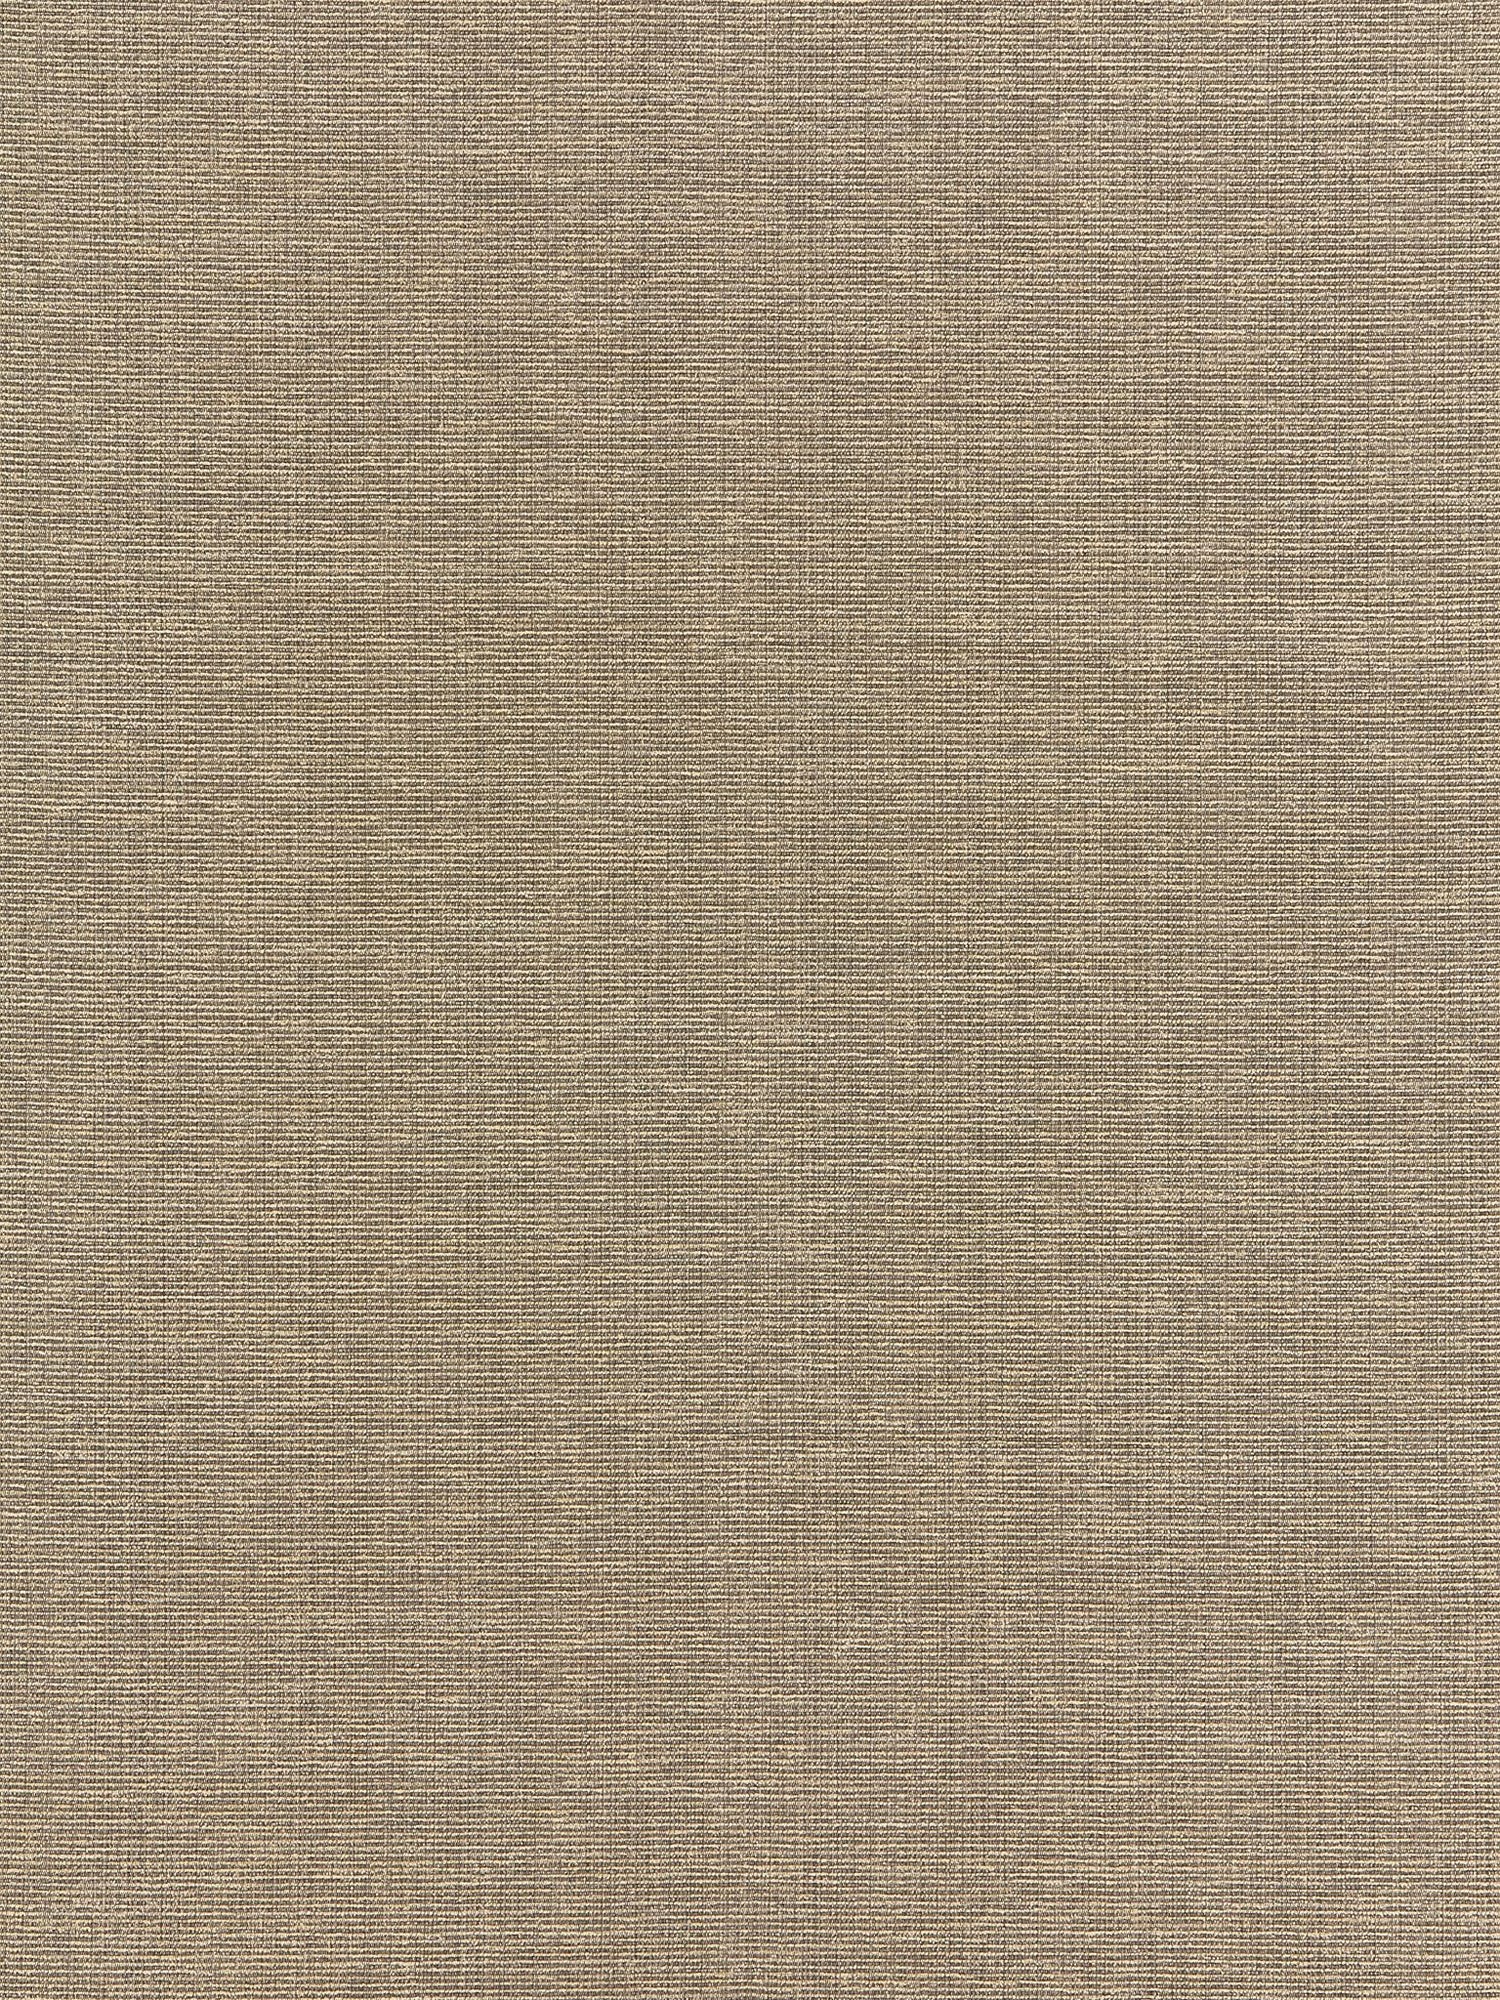 Thompson Chenille fabric in taupe color - pattern number BK 0005K65114 - by Scalamandre in the Old World Weavers collection